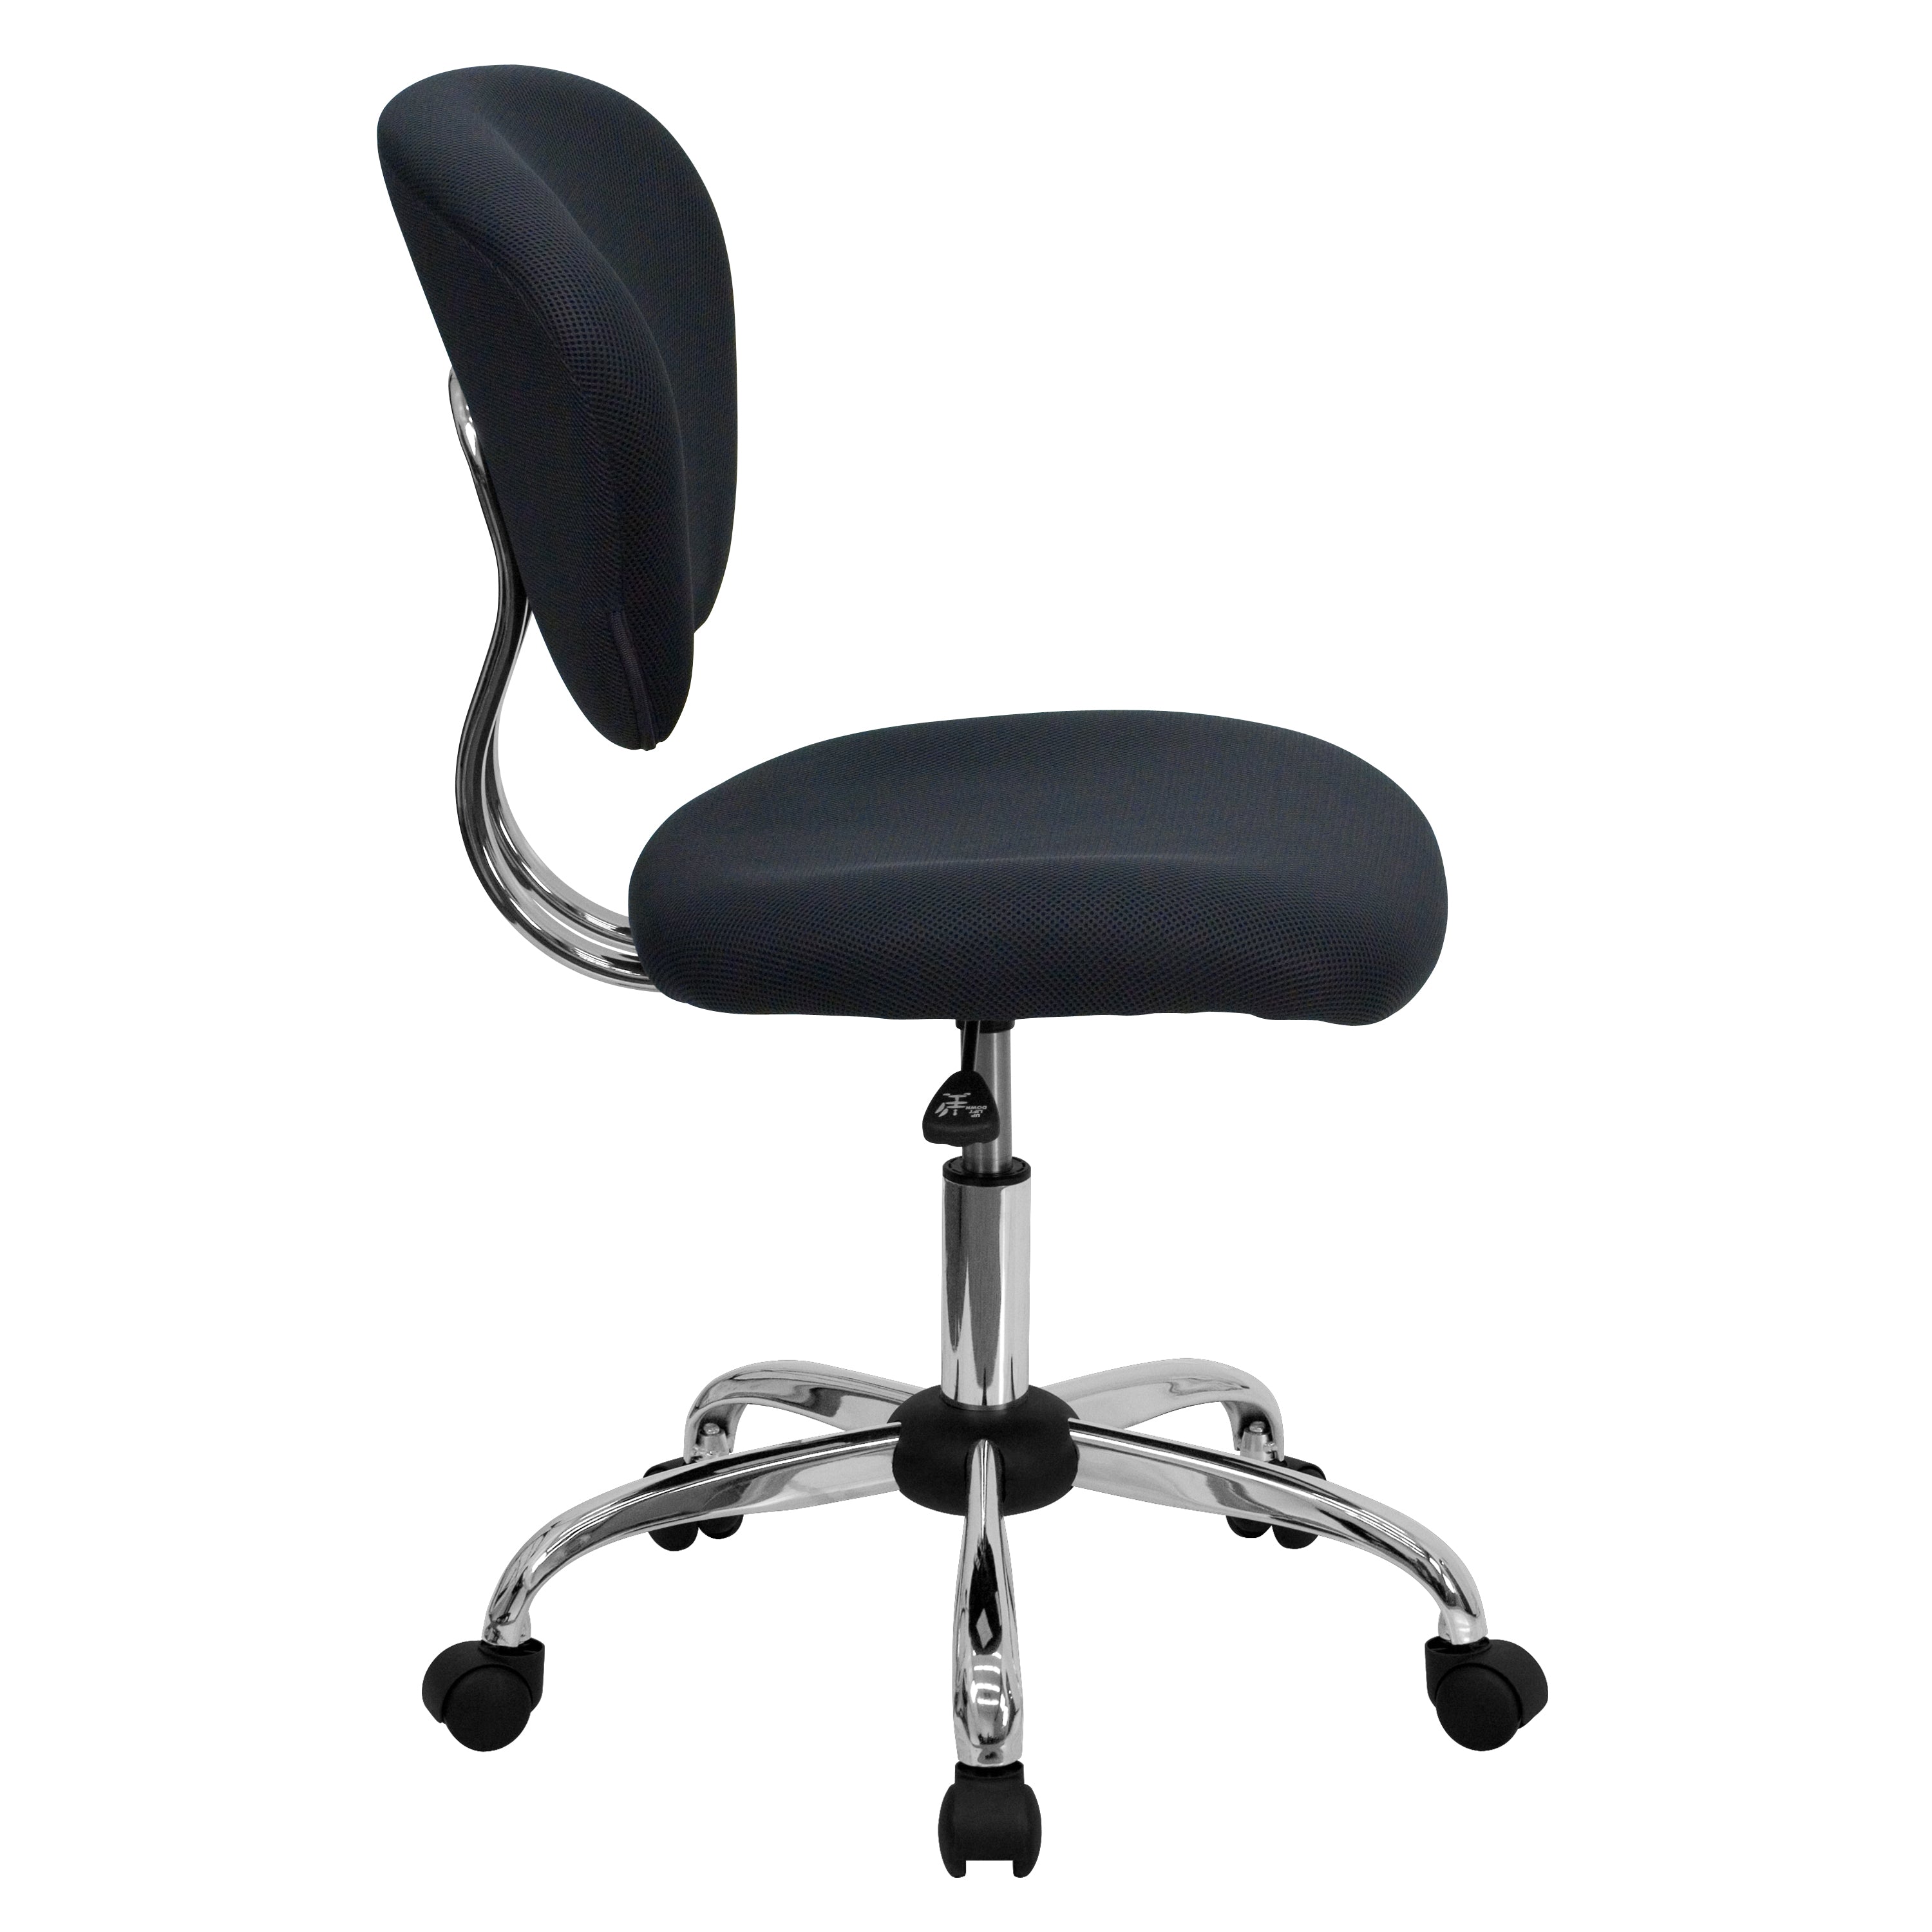 Mid-Back Mesh Padded Swivel Task Office Chair with Chrome Base-Office Chair-Flash Furniture-Wall2Wall Furnishings